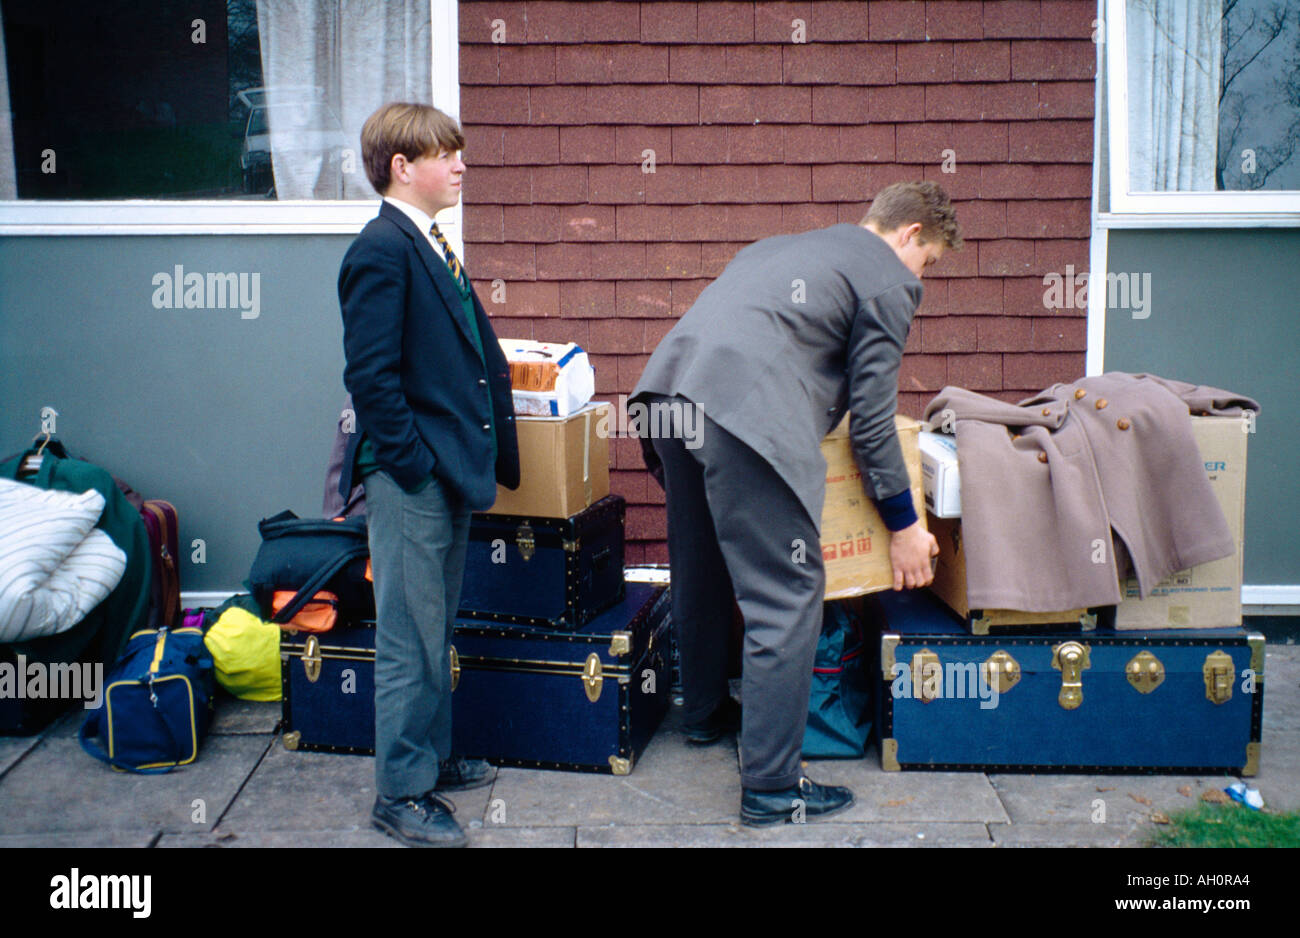 Boarding School Sixth Form Leaving For Holidays At End Of Term Stock Photo